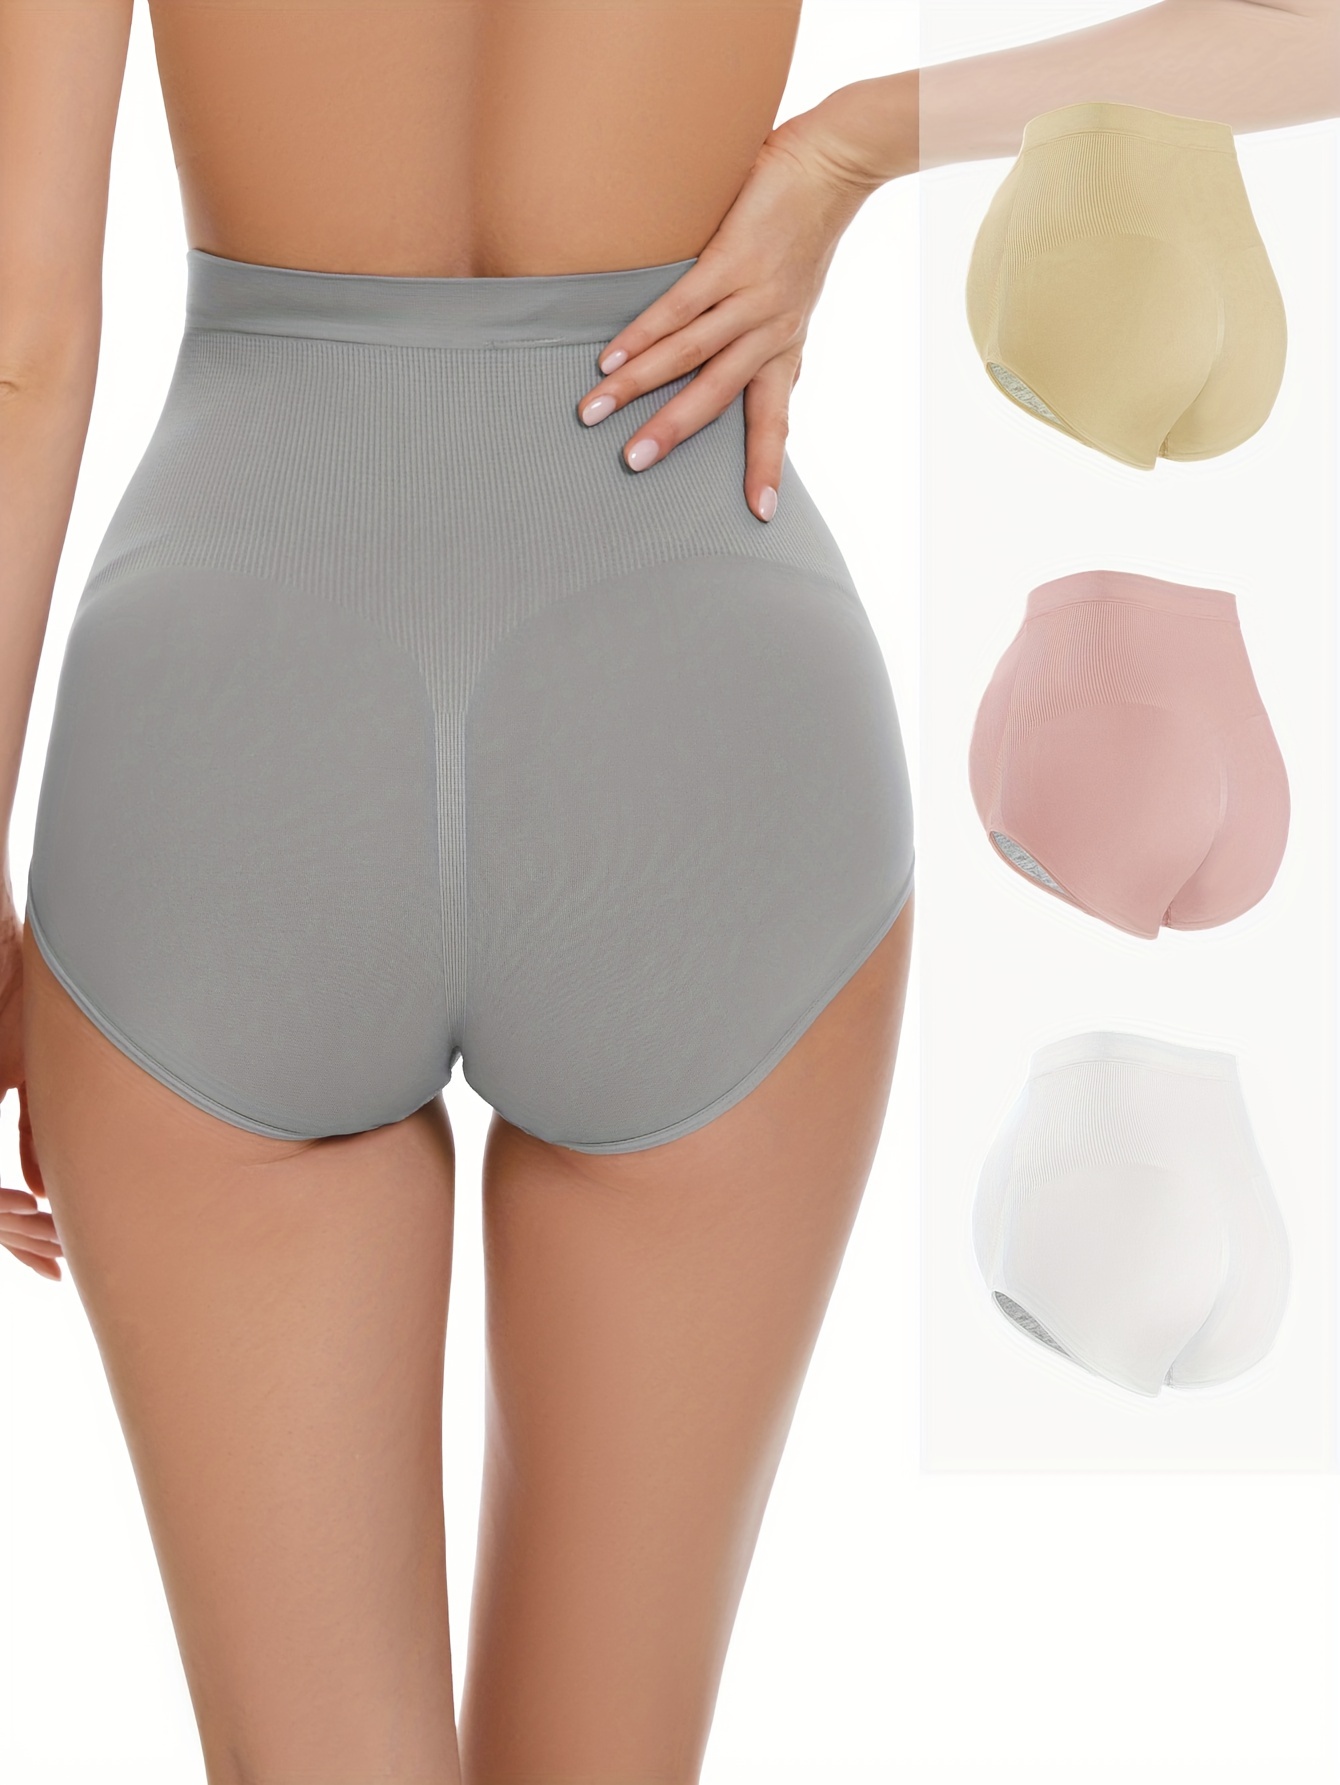 Women's Maternity Panties Cotton High Waist Pregnancy Underwear With  Adjustable Band Belly Support Briefs Over Bump buy 3 send 1 - AliExpress